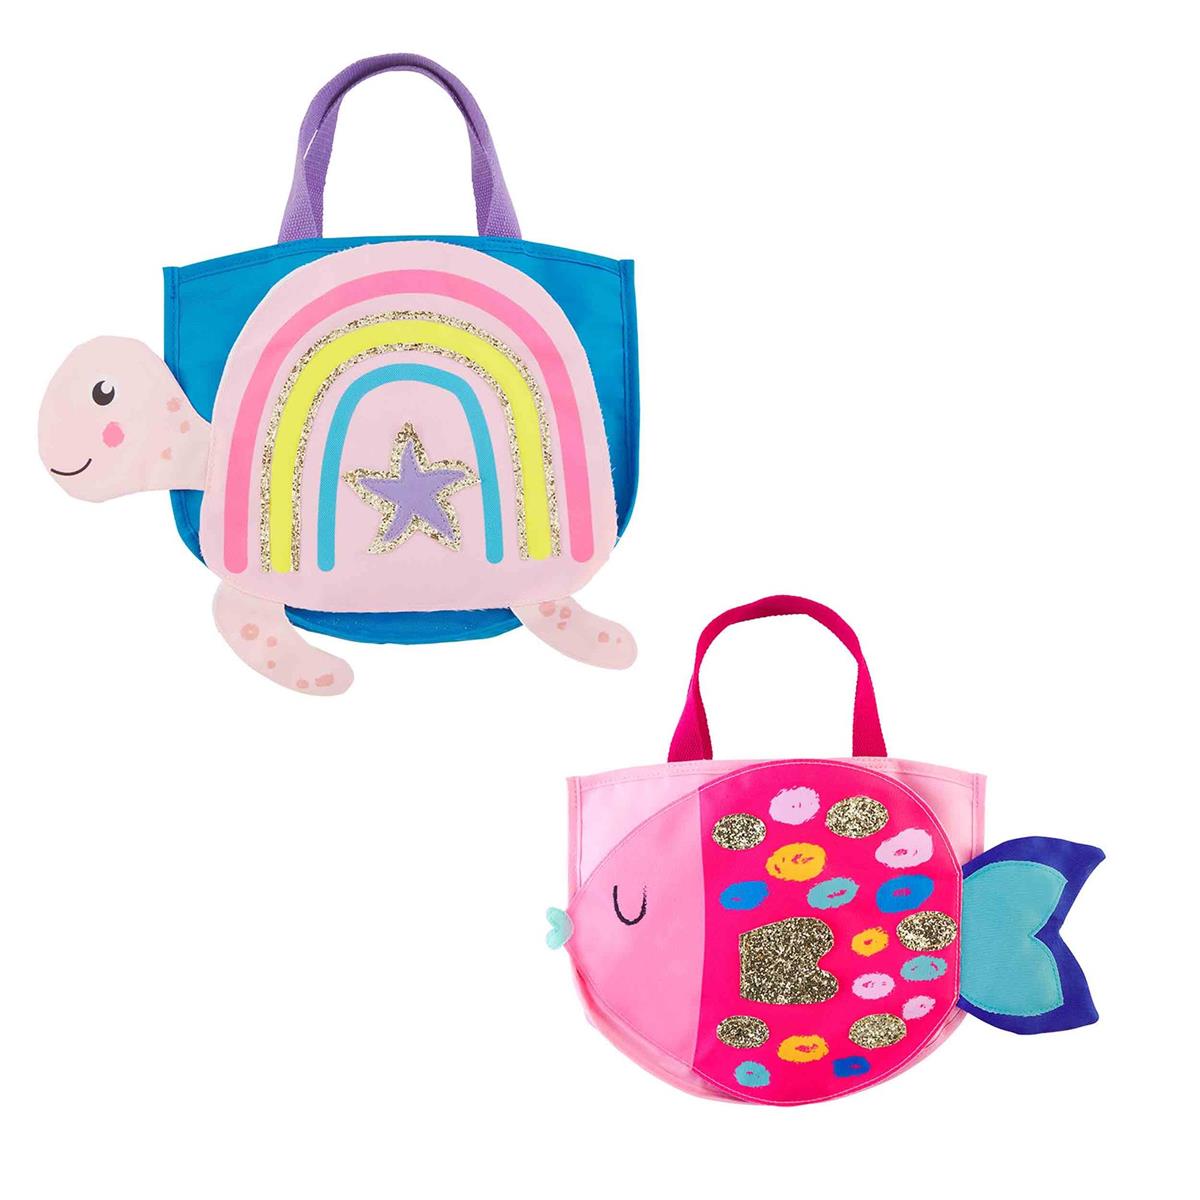 Sequin Fish & Turtle Sand Toys Tote Sets